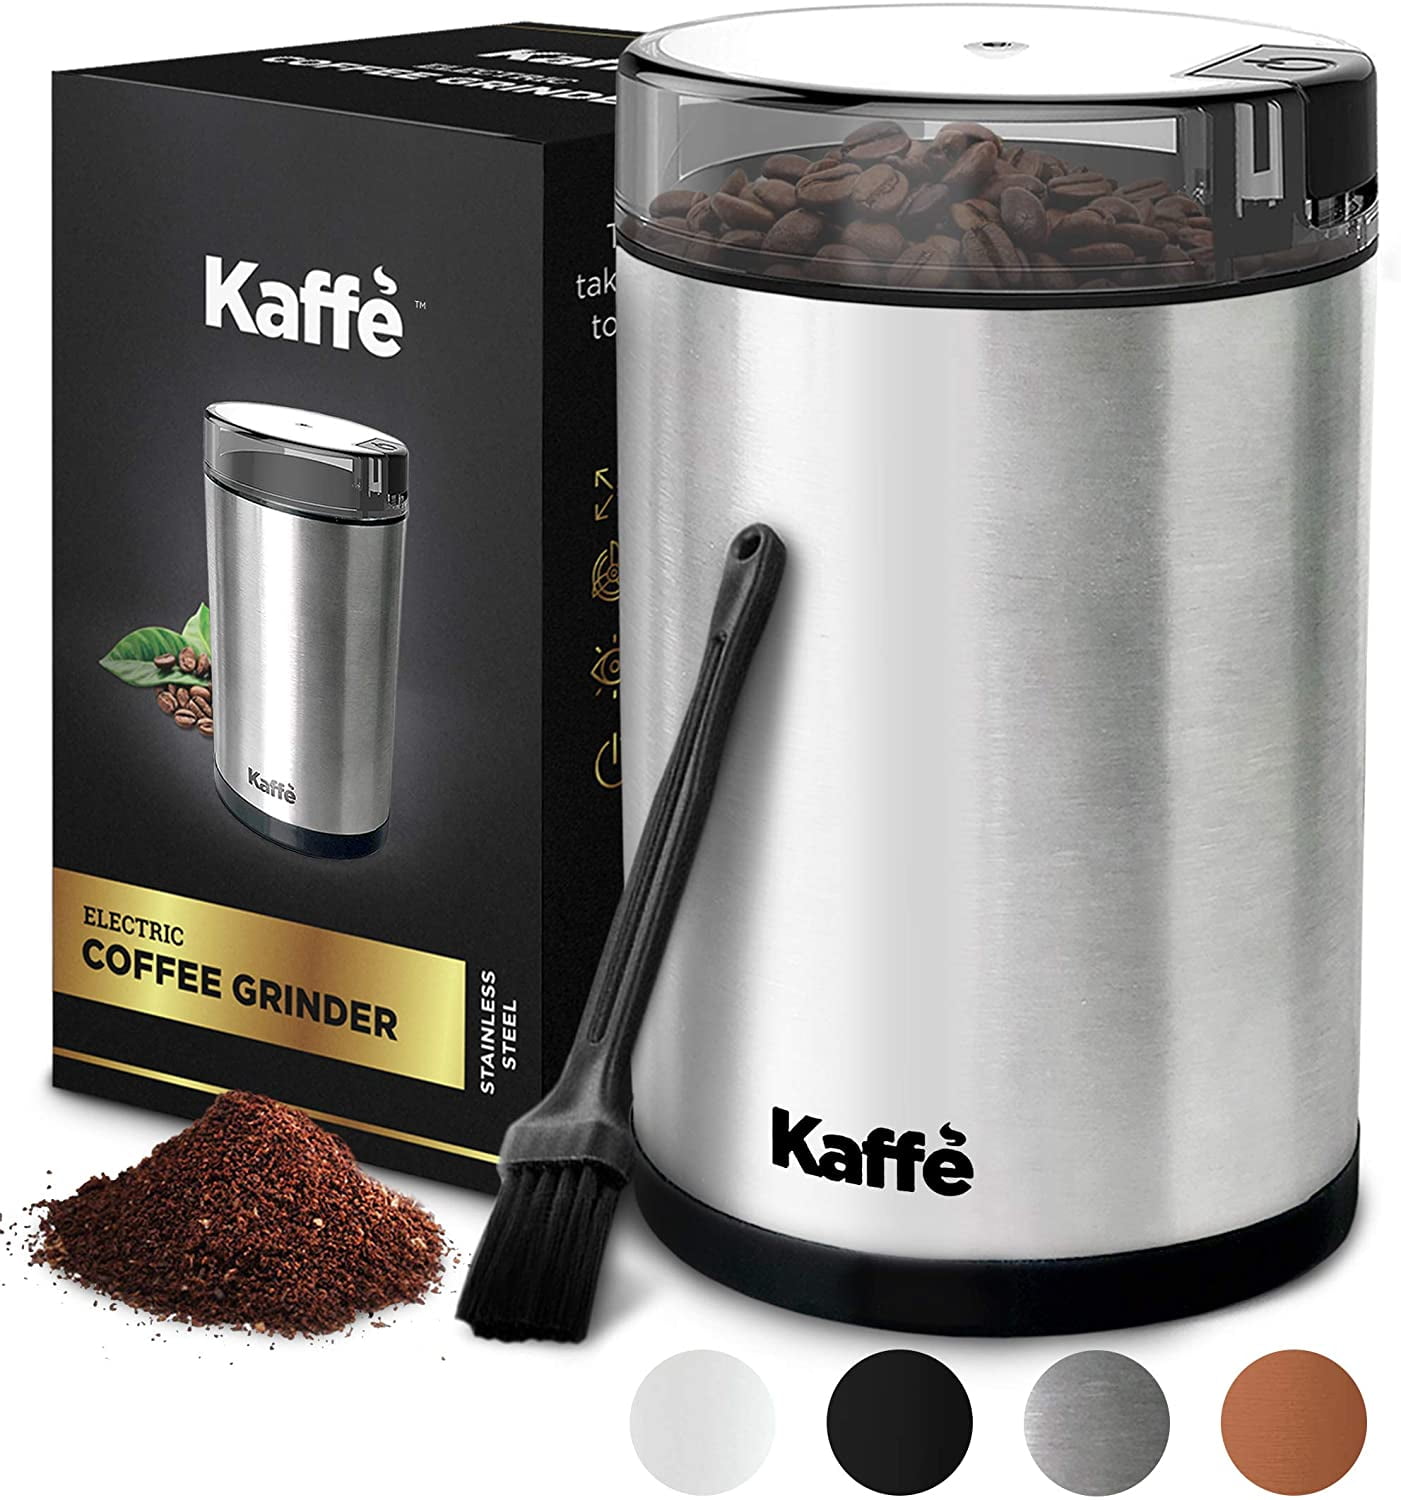 Wirsh Coffee Grinder - Electric Coffee Grinder with Stainless Steel Blades,Coffee and Spice Grinder with 15 Cups Large Capacity,150W Powerful Grinder